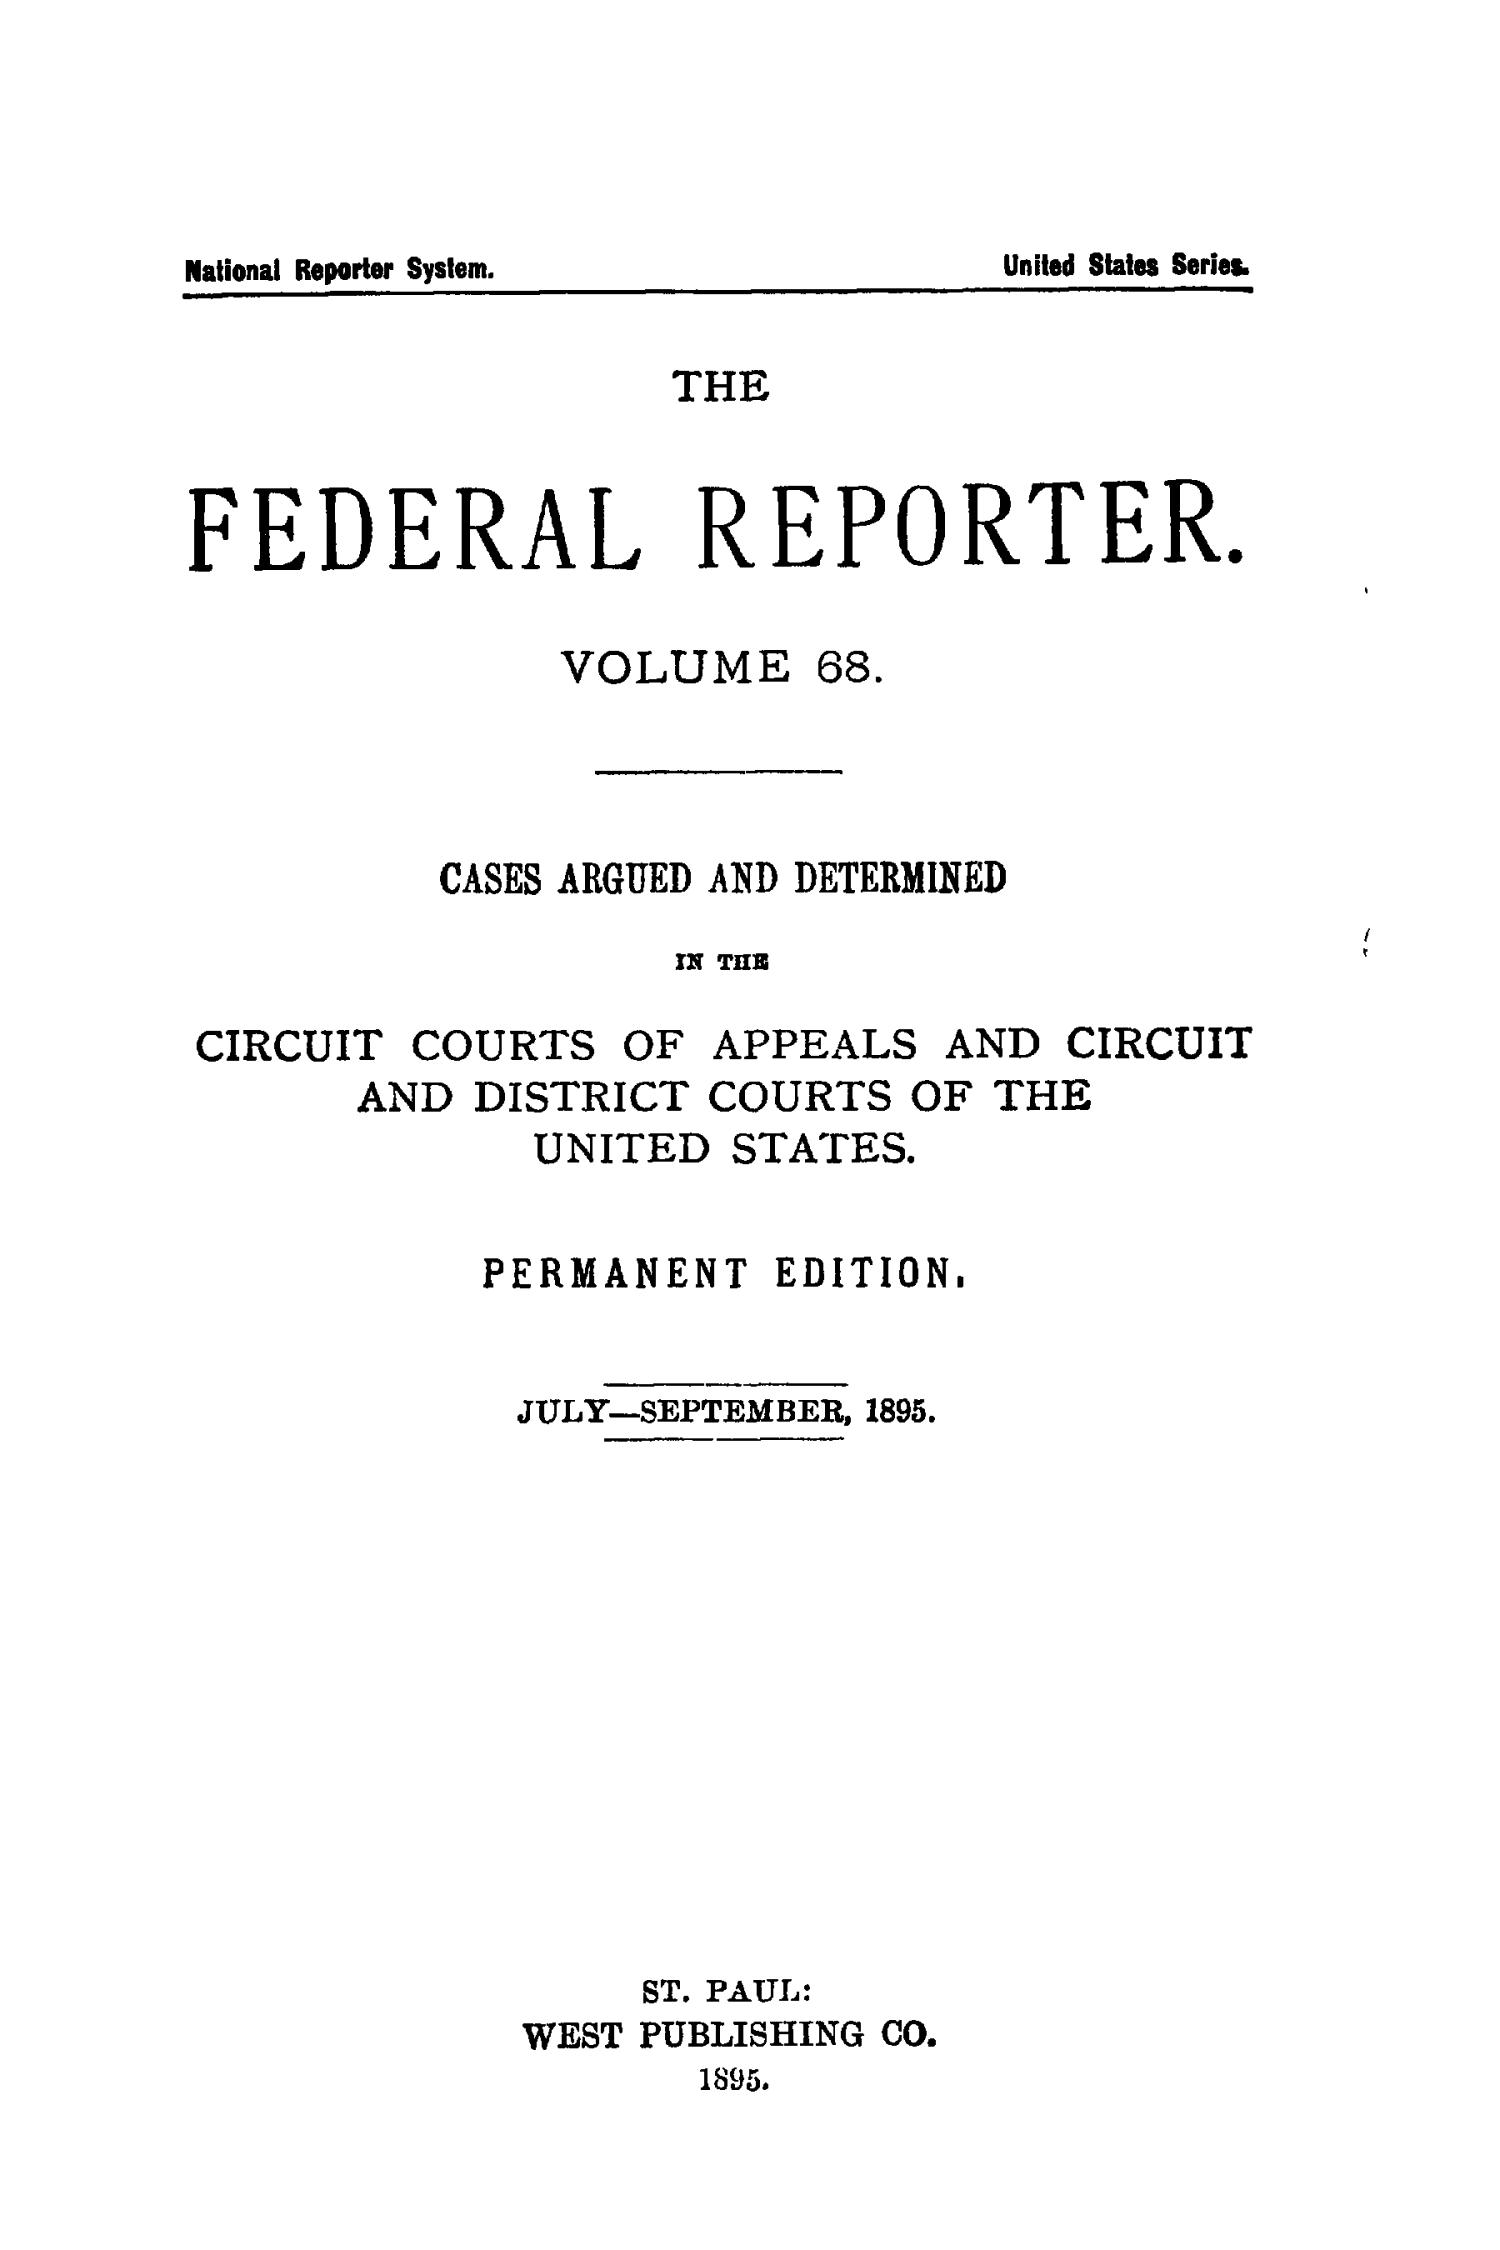 The Federal Reporter. Volume 68 Cases Argued and Determined in the Circuit Courts of Appeals and Circuit and District Courts of the United States. July-September, 1895.
                                                
                                                    Title Page
                                                